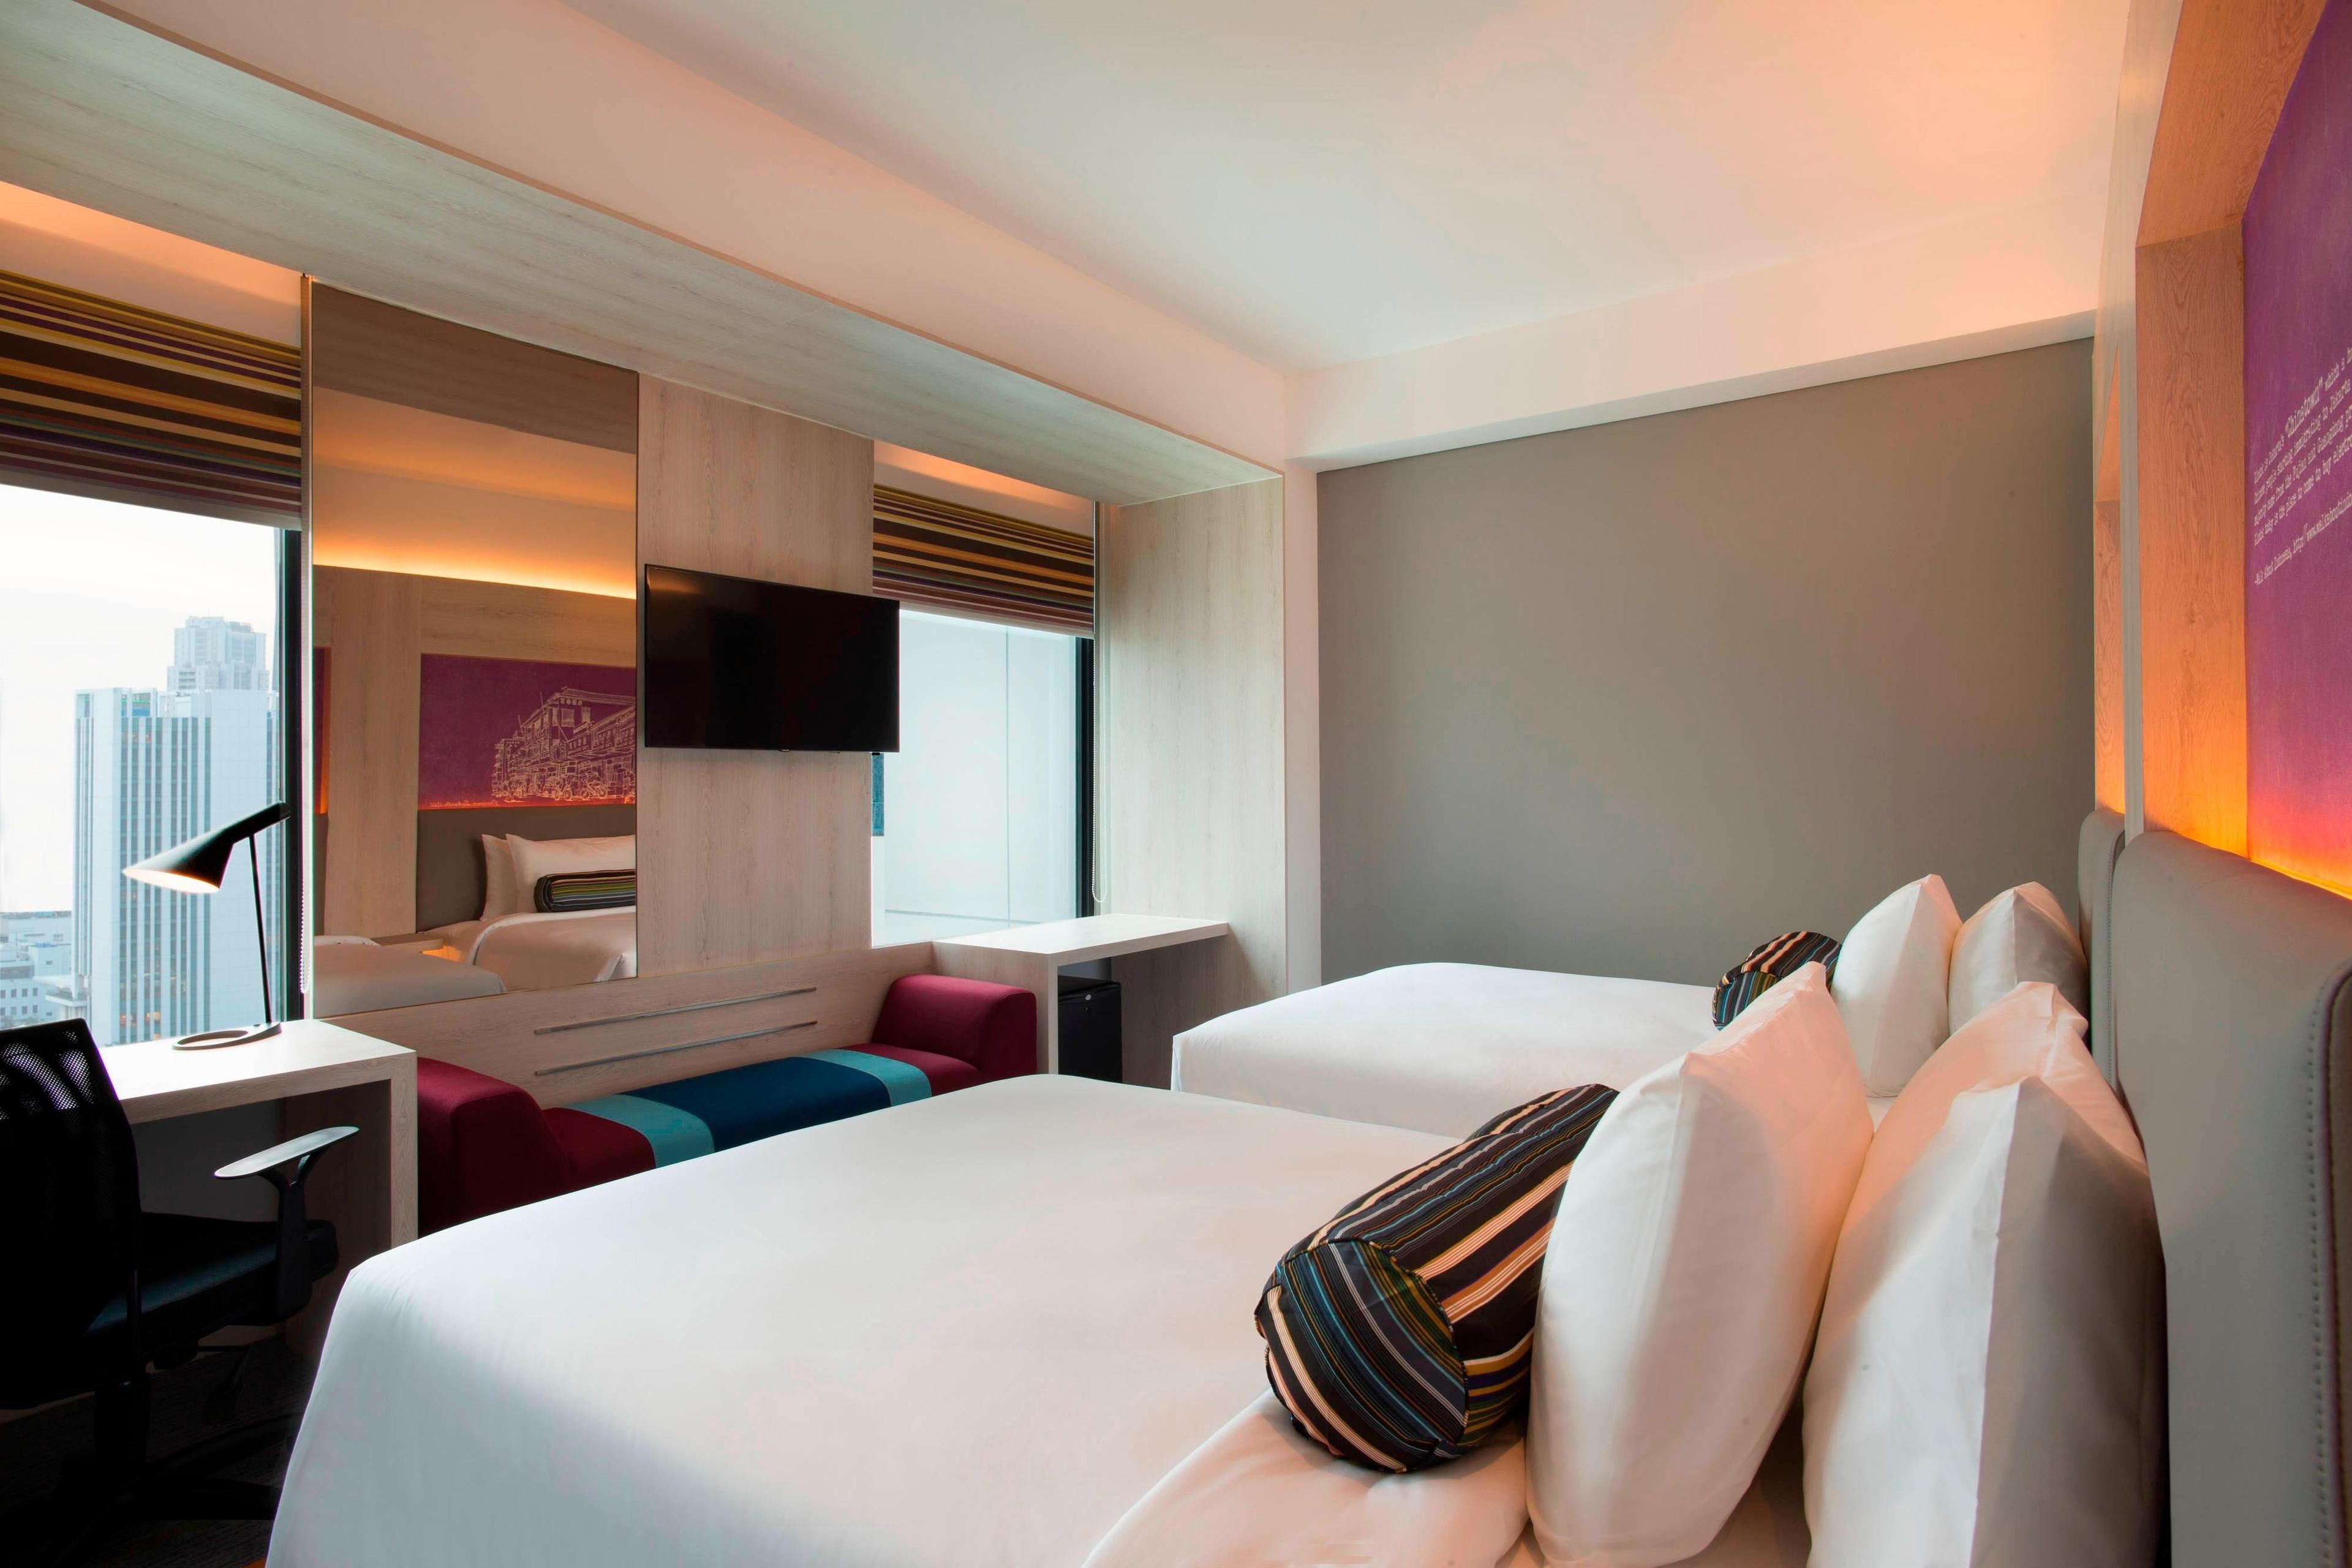 Bring your entire family to stay in one of our twin/twin guest rooms in Jakarta, where modern style meets comfort.